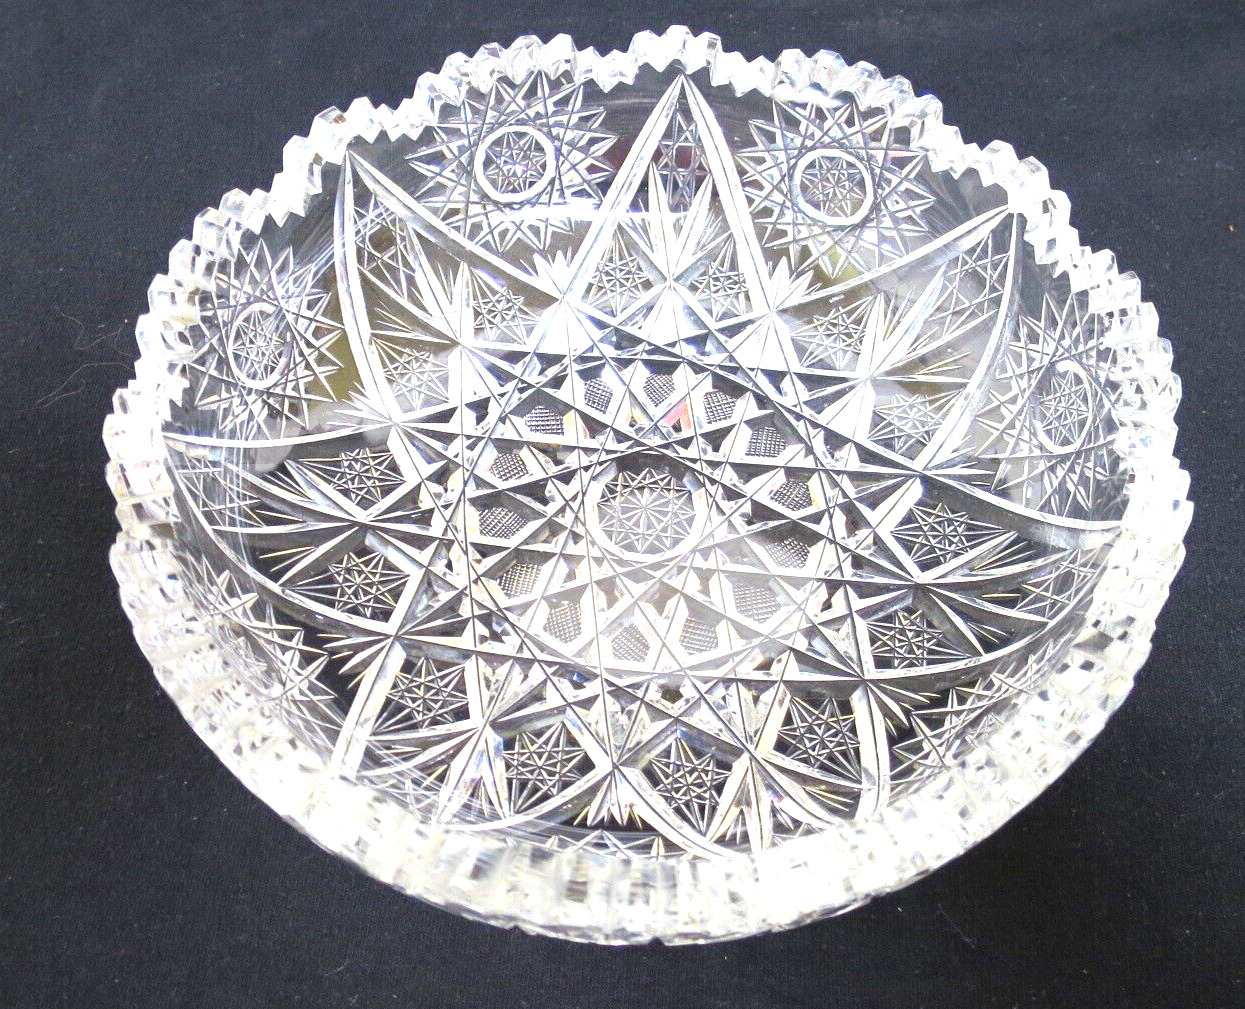 Exquisite American Brilliant Cut Glass Bowl With Intricate and Detailed Design